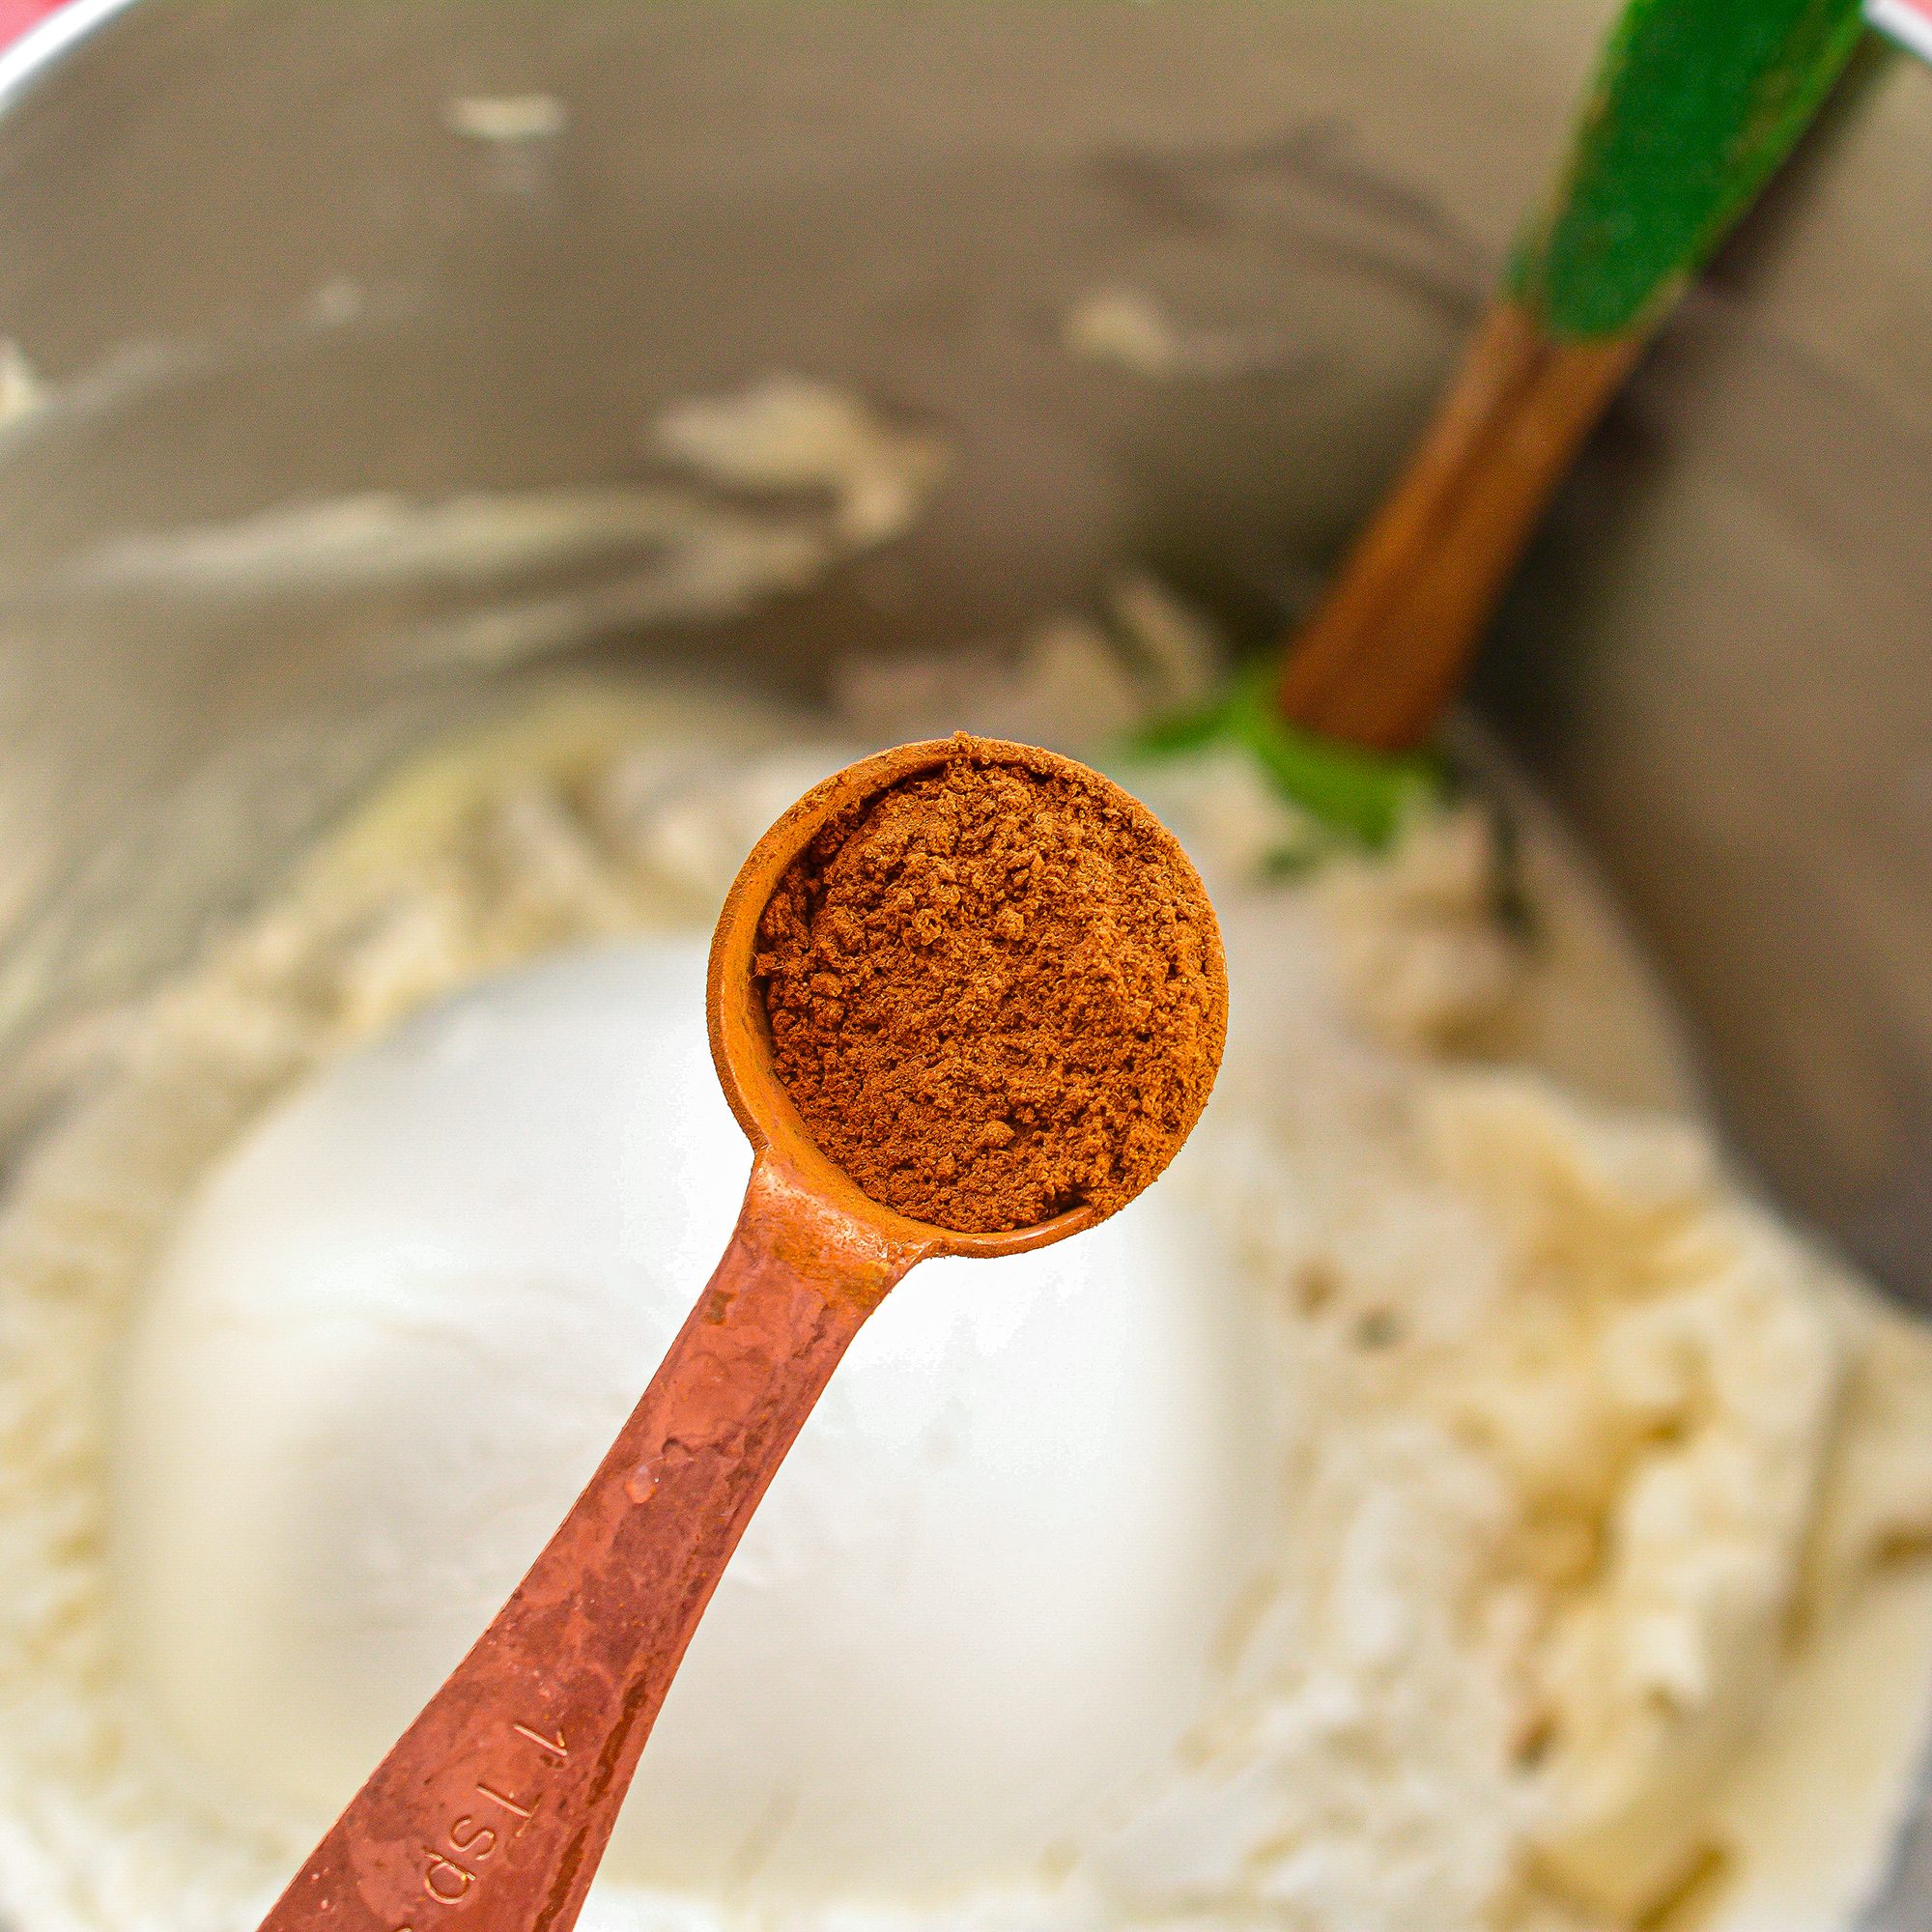 Place the remaining ingredients for the cookies into the mixing bowl, and beat until a well-combined dough has formed.